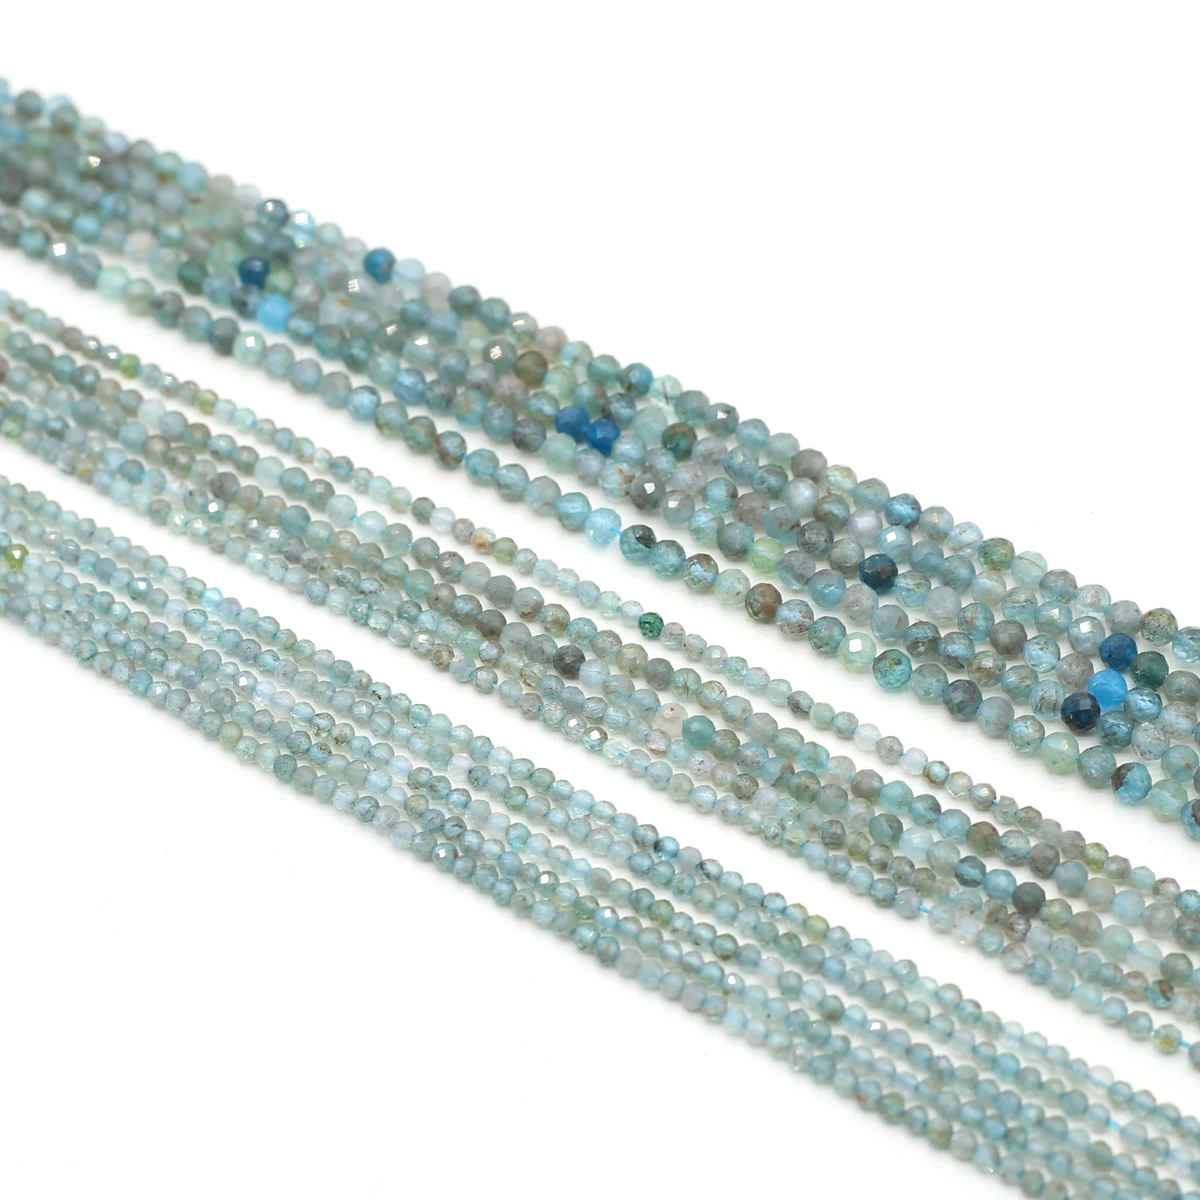 

Round Apatite Beads Faceted Natural Semi-Precious Stones Loose Spacer Beads for Jewelry Making DIY Necklace Accessories 38cm